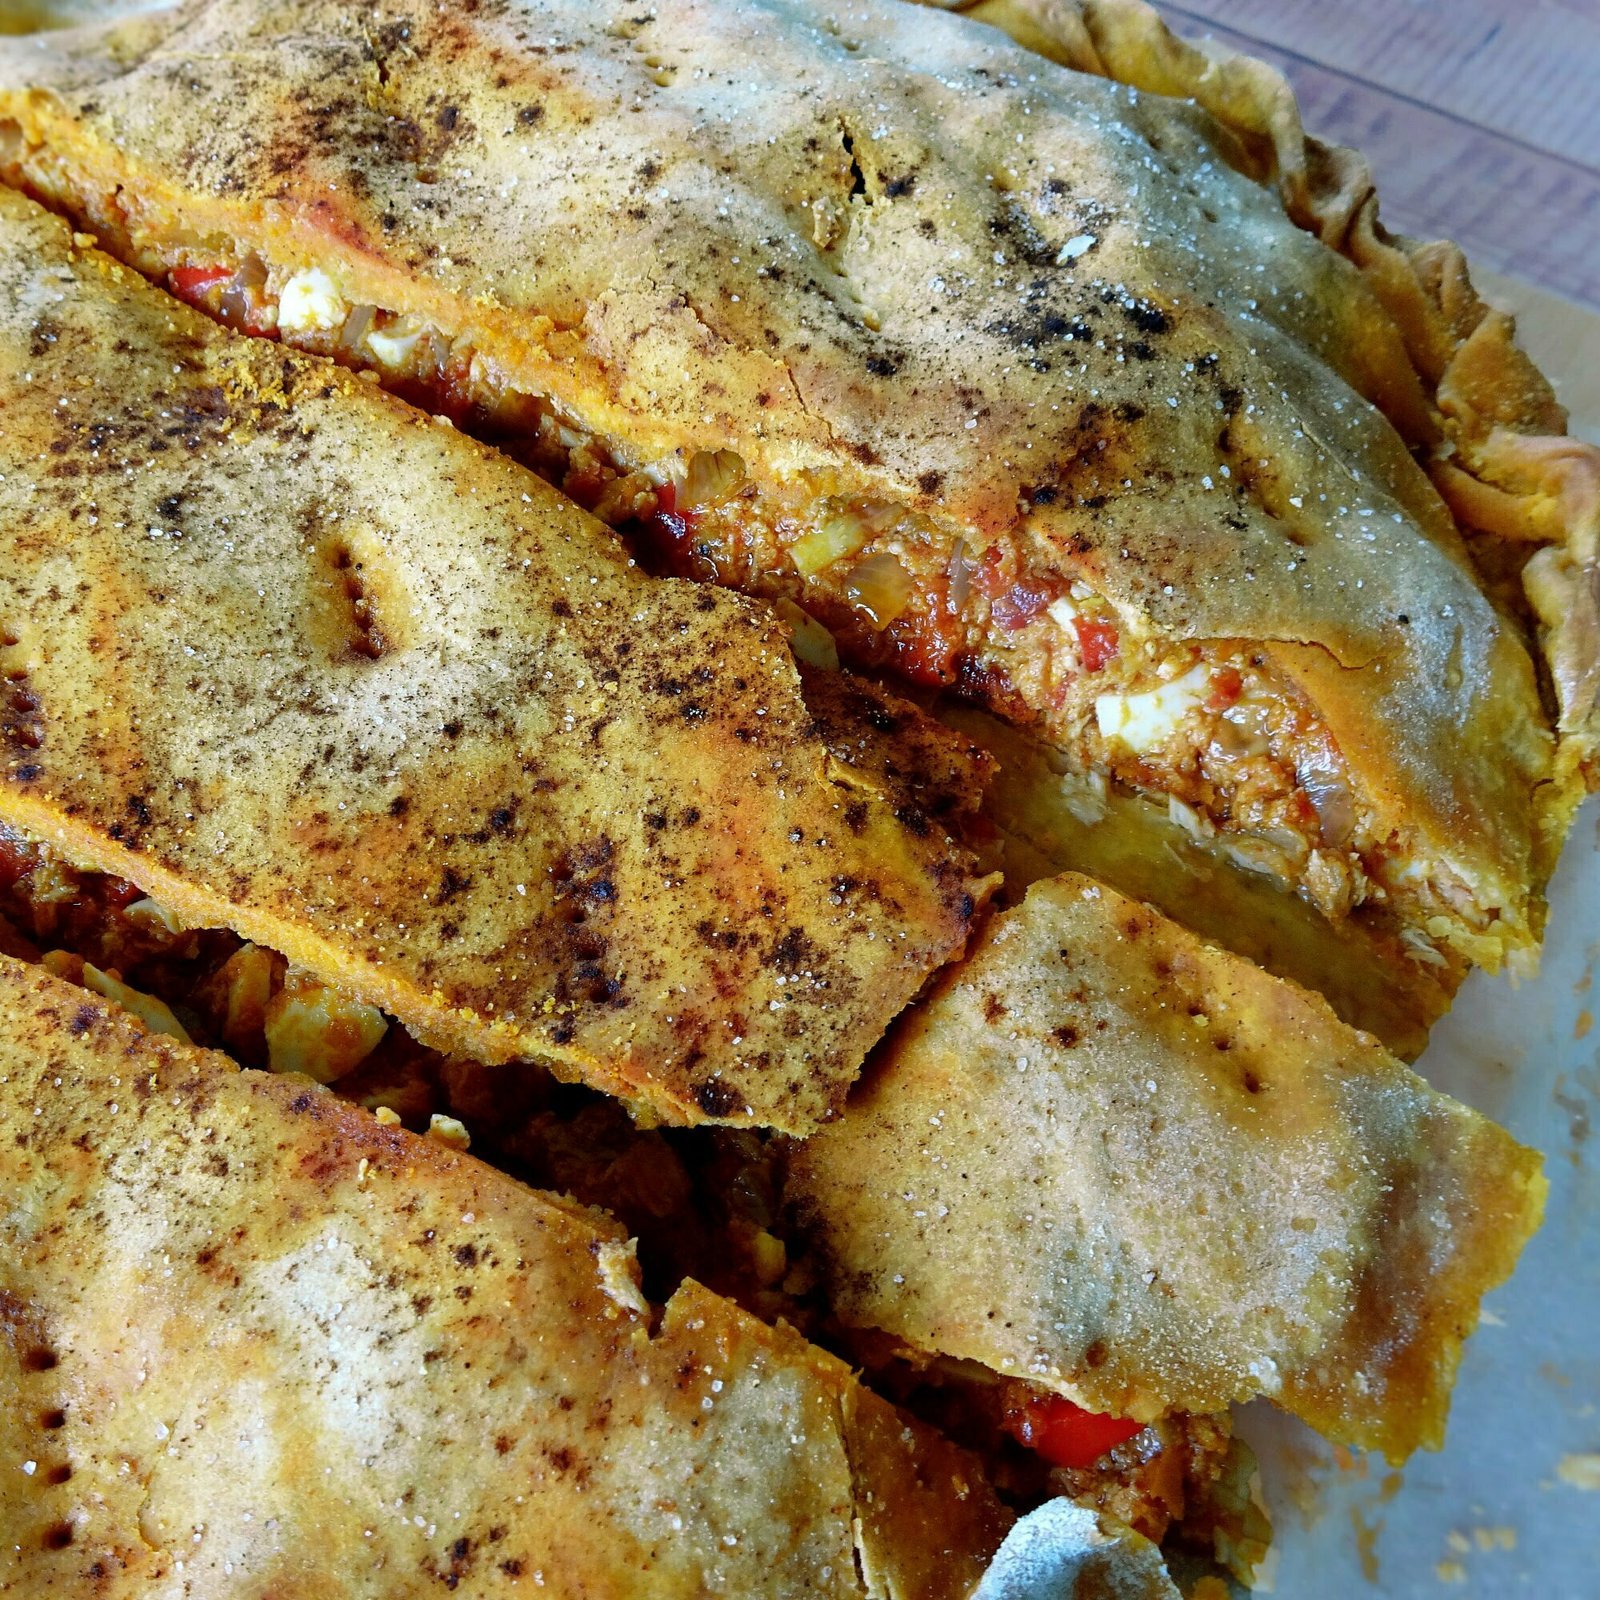 close up shot of an oven-baked empanada gallega with tuna and tomato filling